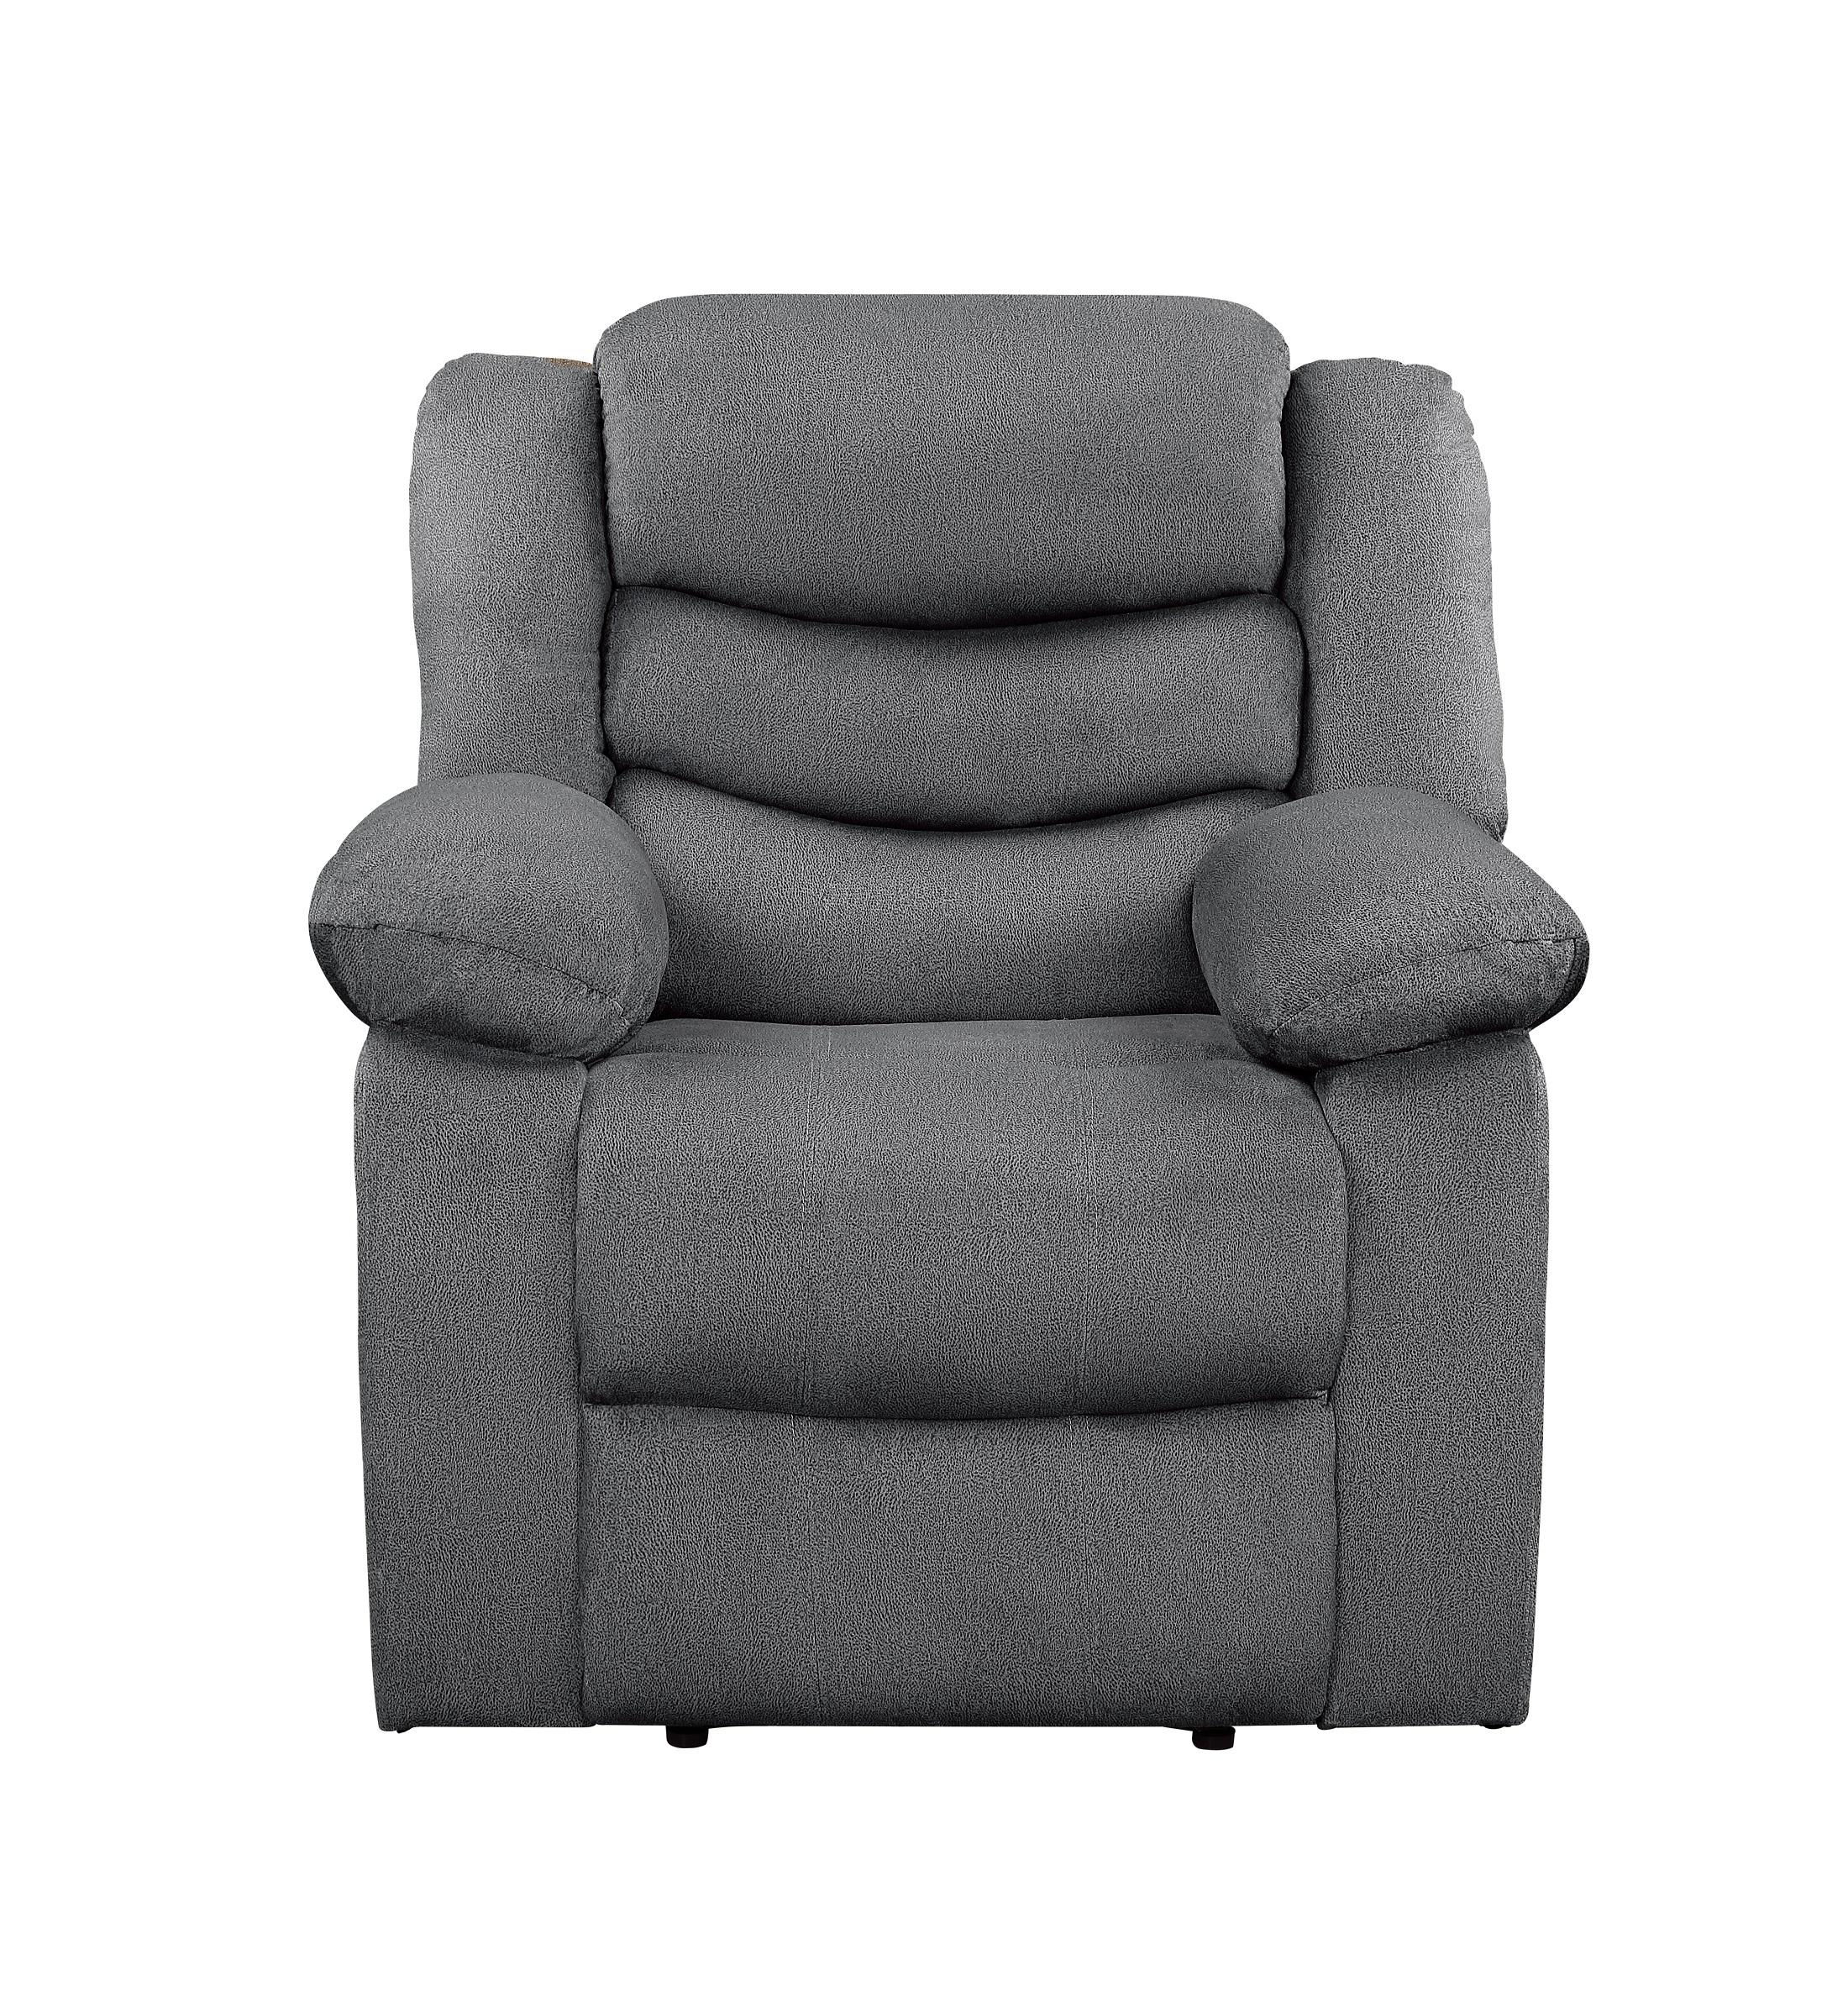 

    
Transitional Gray Microfiber Reclining Chair Homelegance 9526GY-1 Discus
